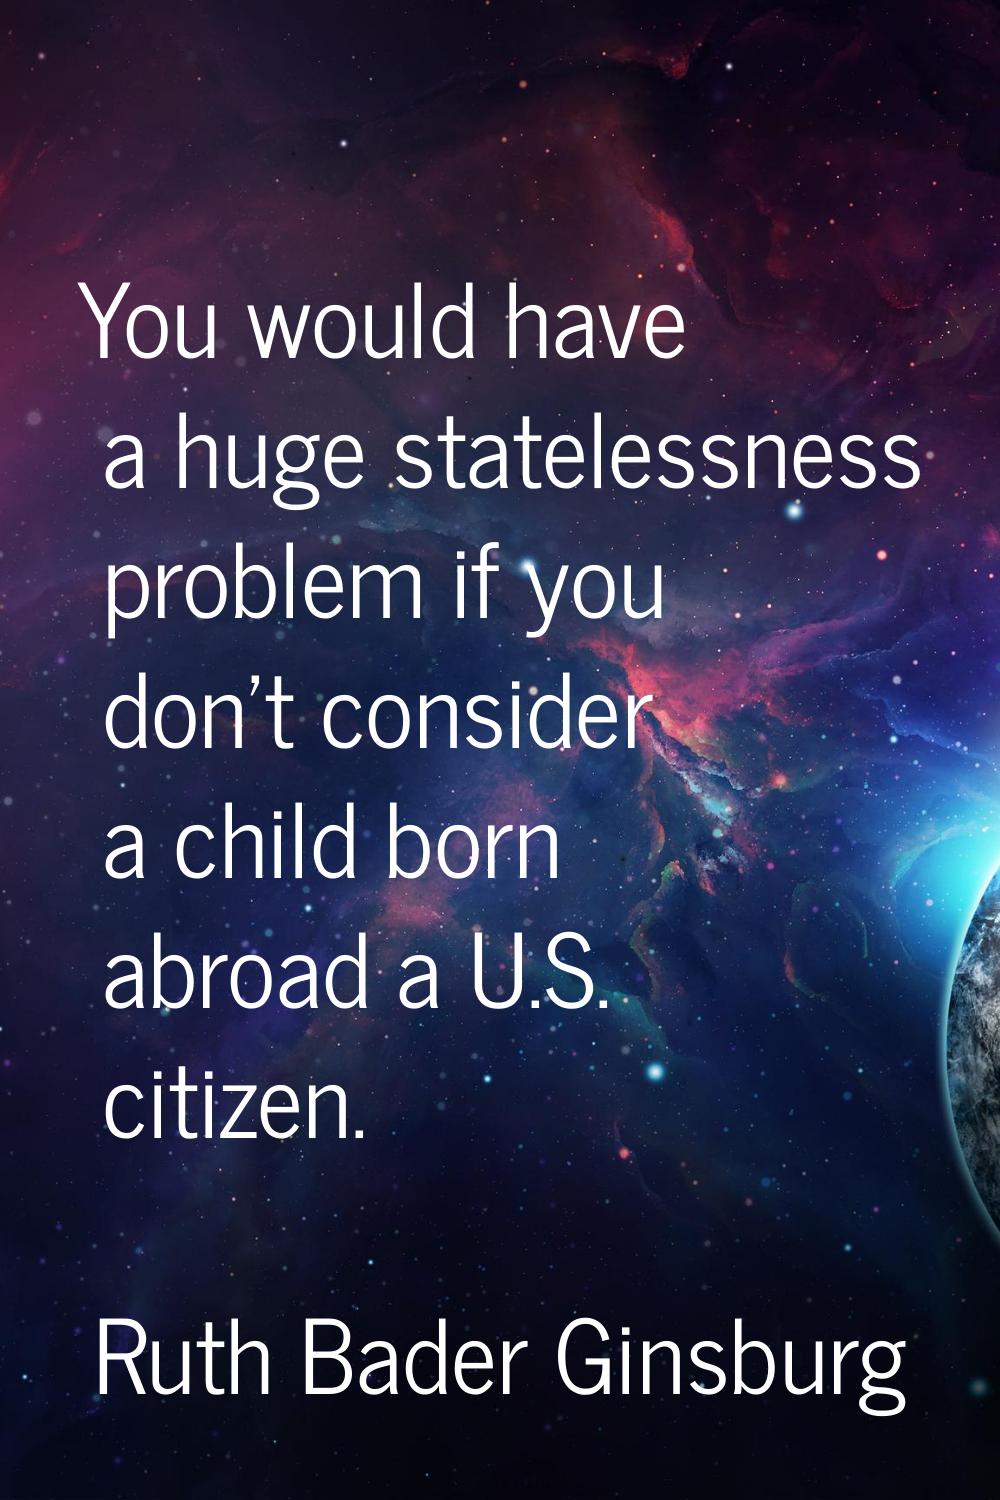 You would have a huge statelessness problem if you don't consider a child born abroad a U.S. citize